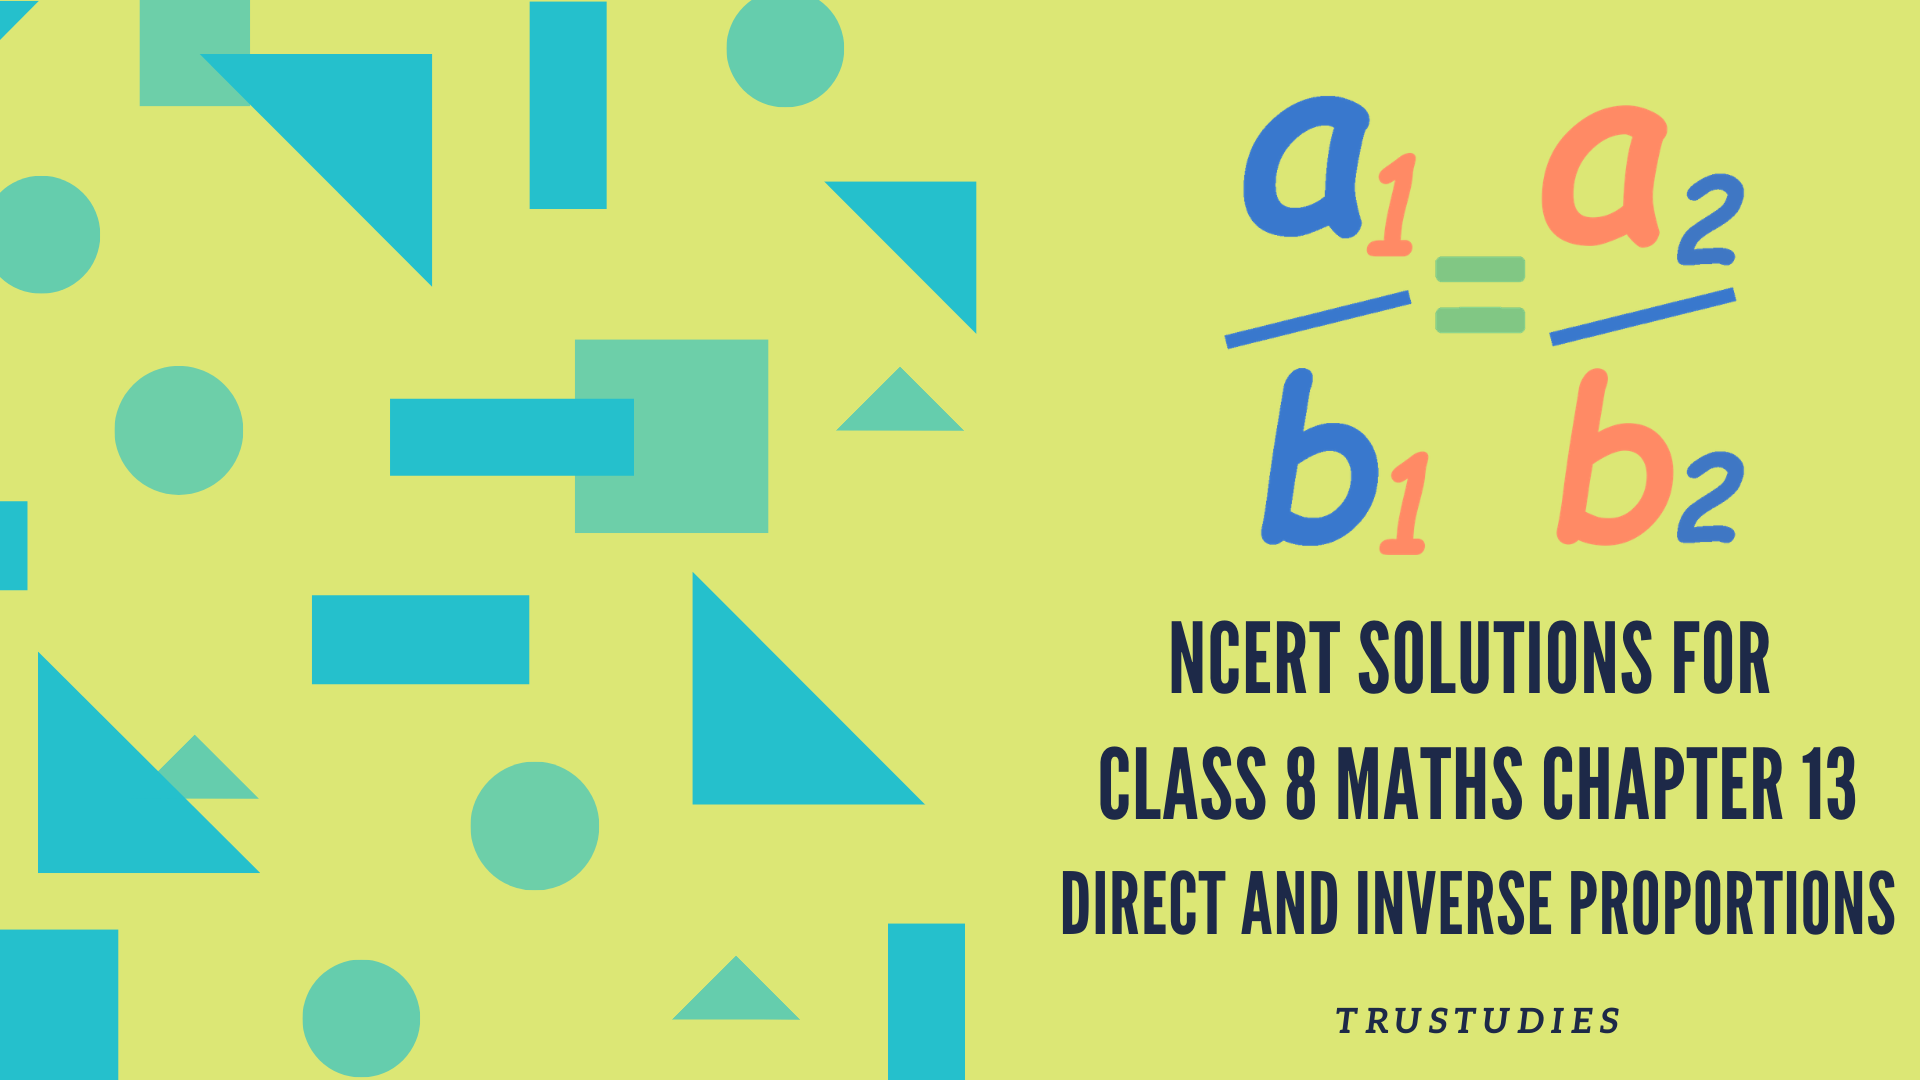 NCERT solutions for class 8 maths chapter 13 direct and inverse proportions banner image